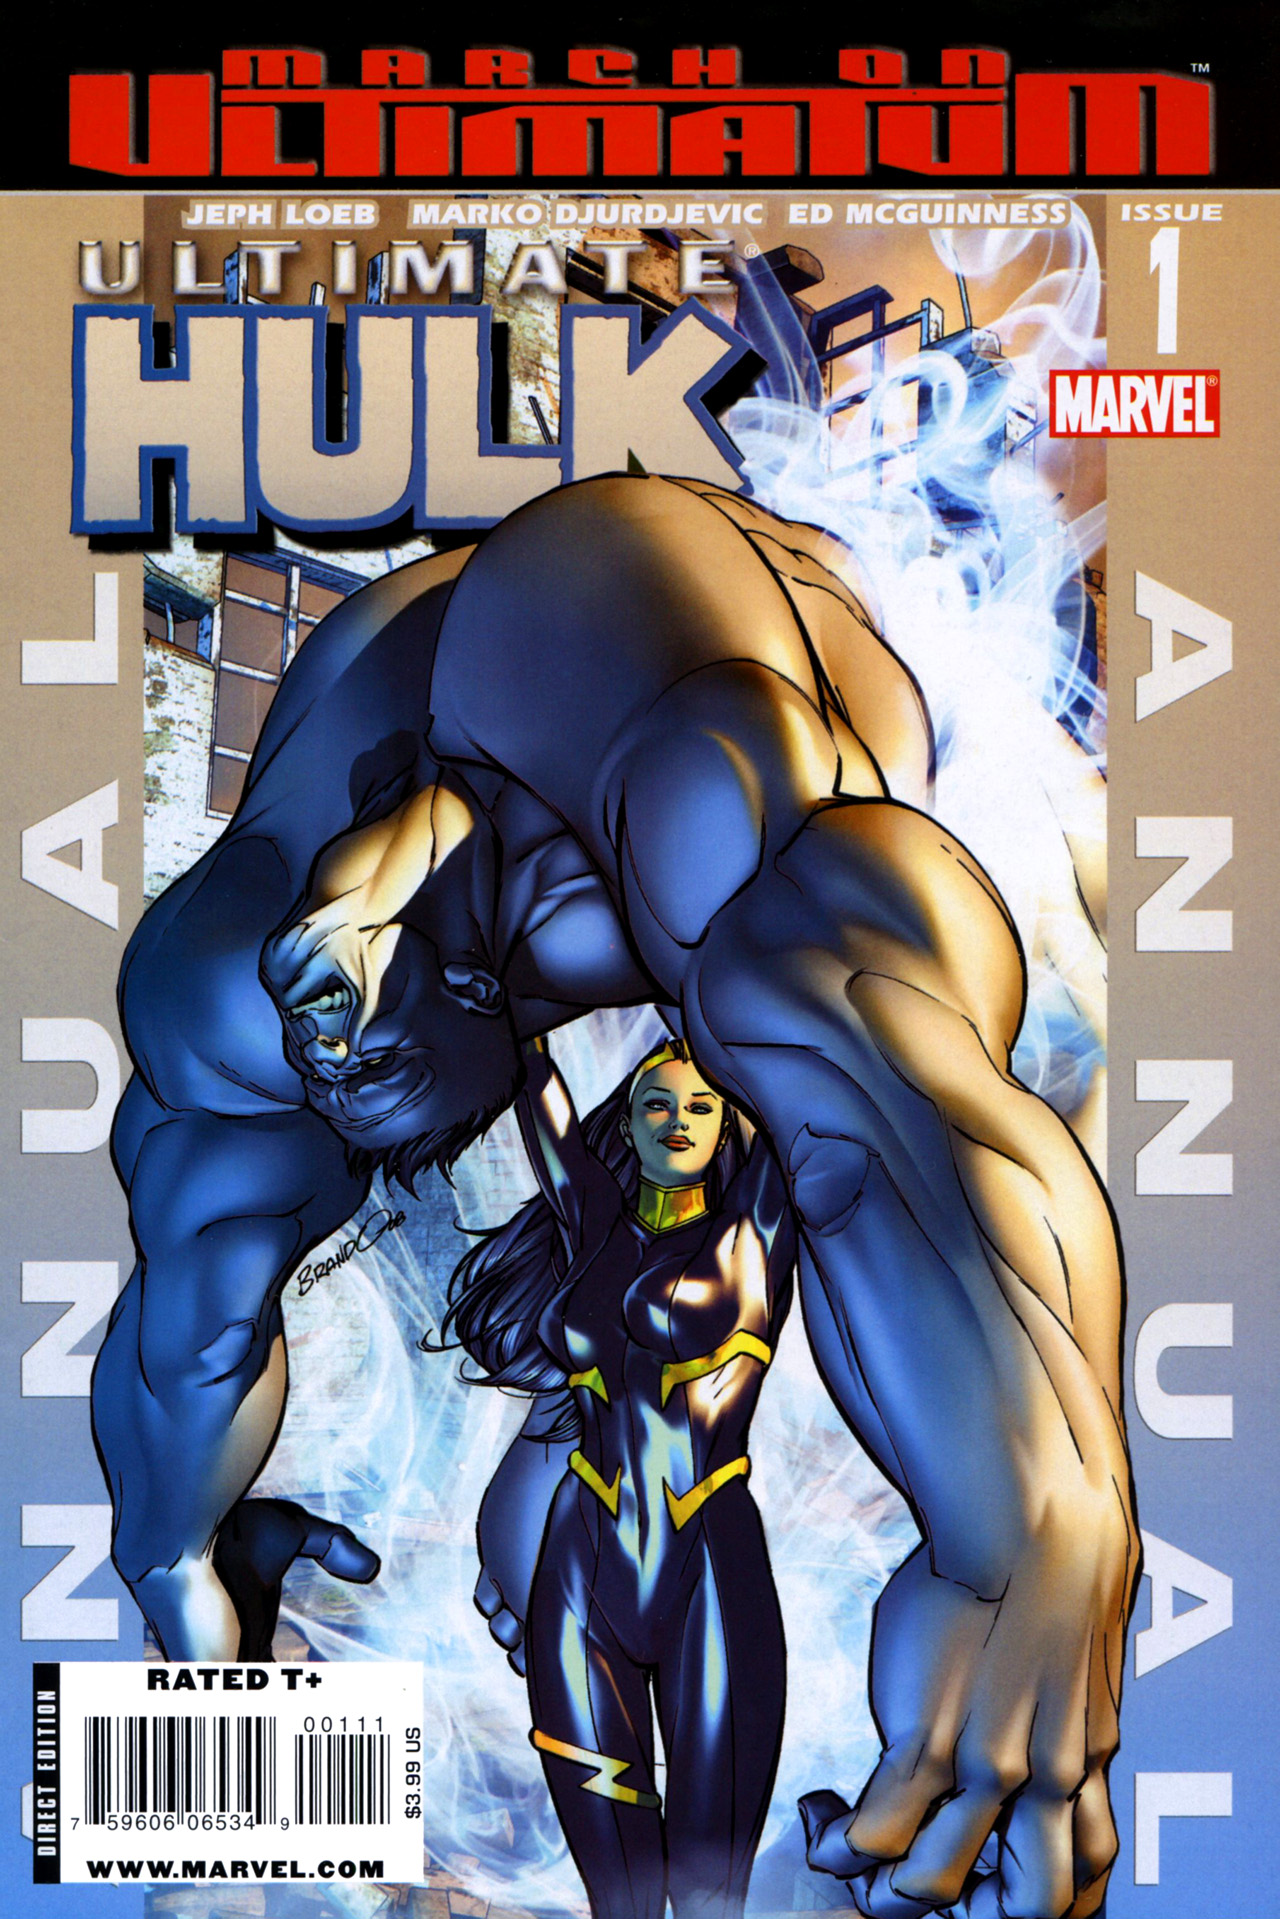 Read online Ultimate Hulk Annual comic -  Issue # Full - 1